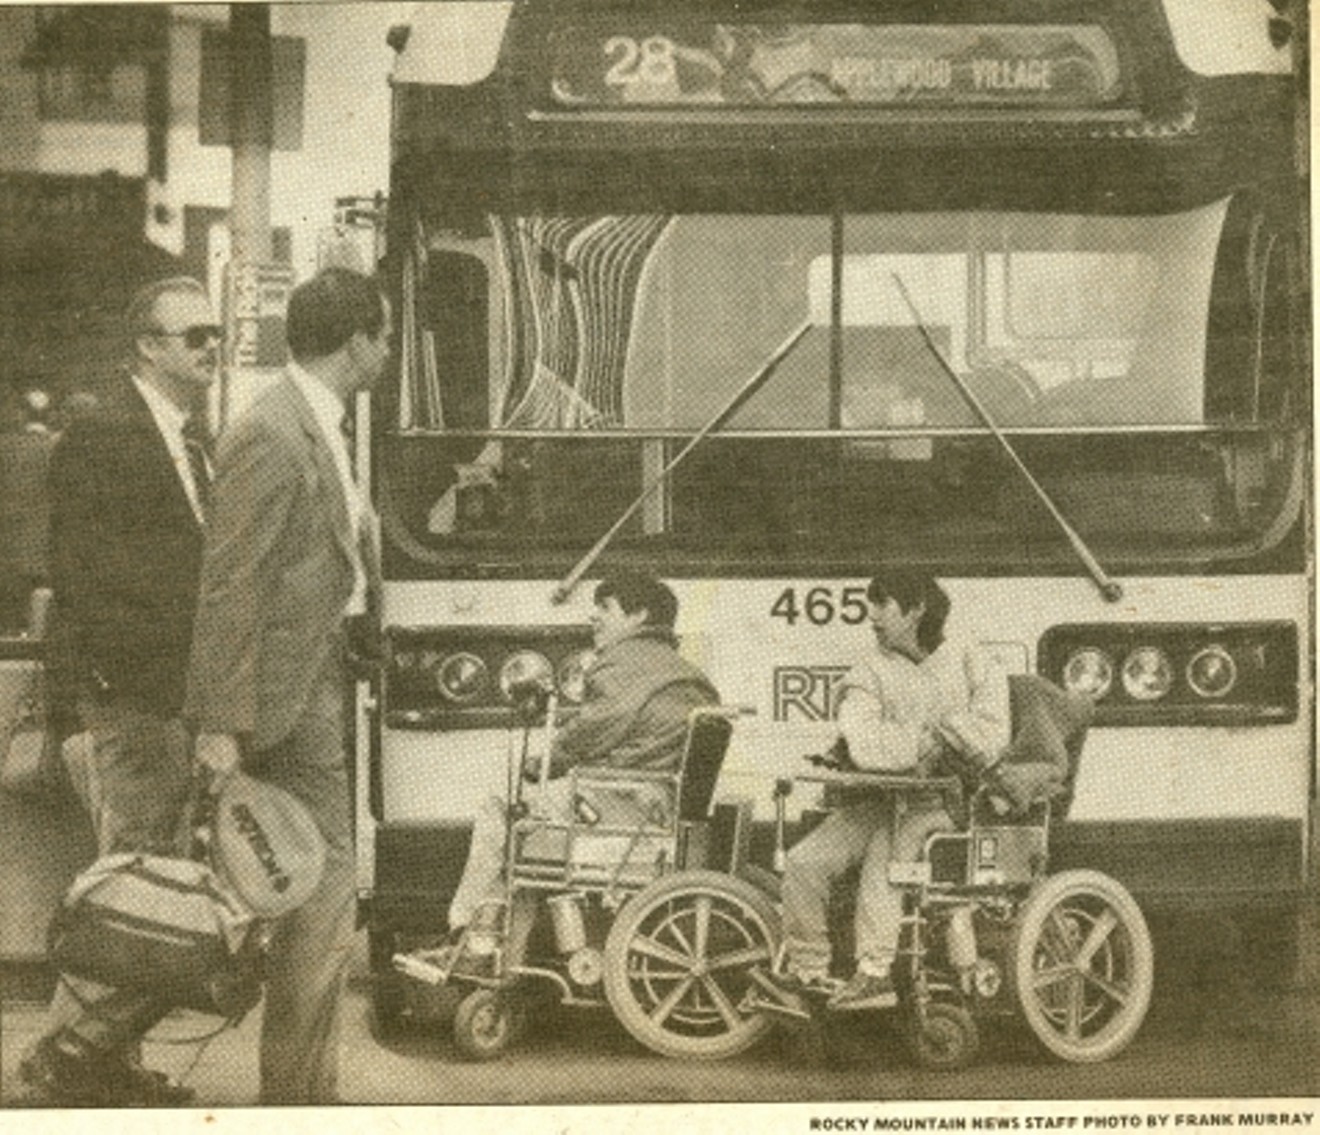 ADAPT members block a bus with their wheelchairs in February 1985, in a repeat of the Gang of 19's action.